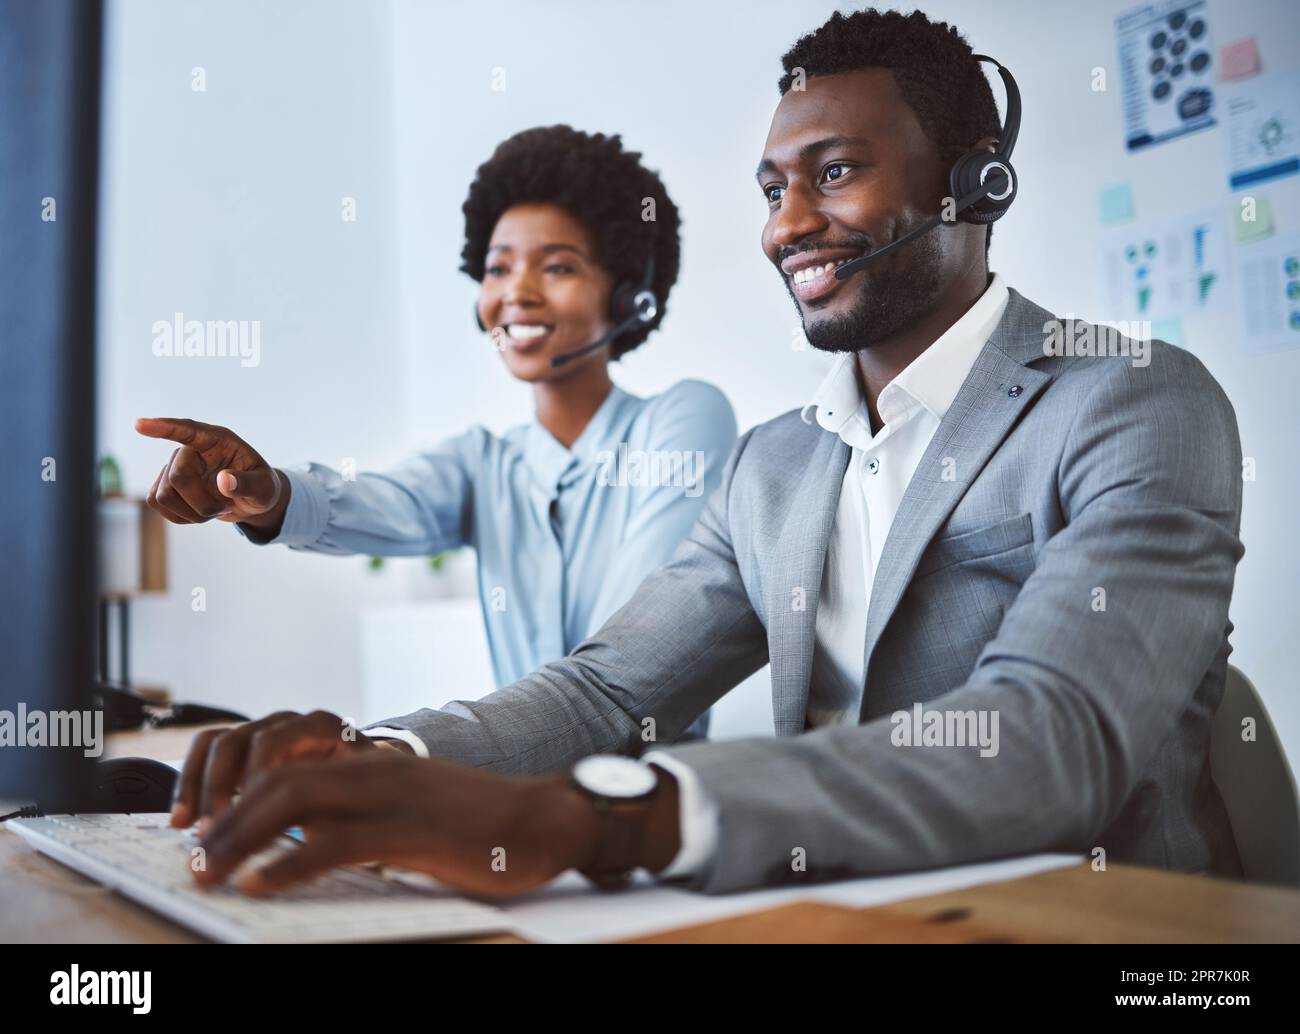 Happy african american male call centre telemarketing agent discussing plans with colleague while working together on computer in an office. Two consultants troubleshooting solution for customer service and sales support Stock Photo